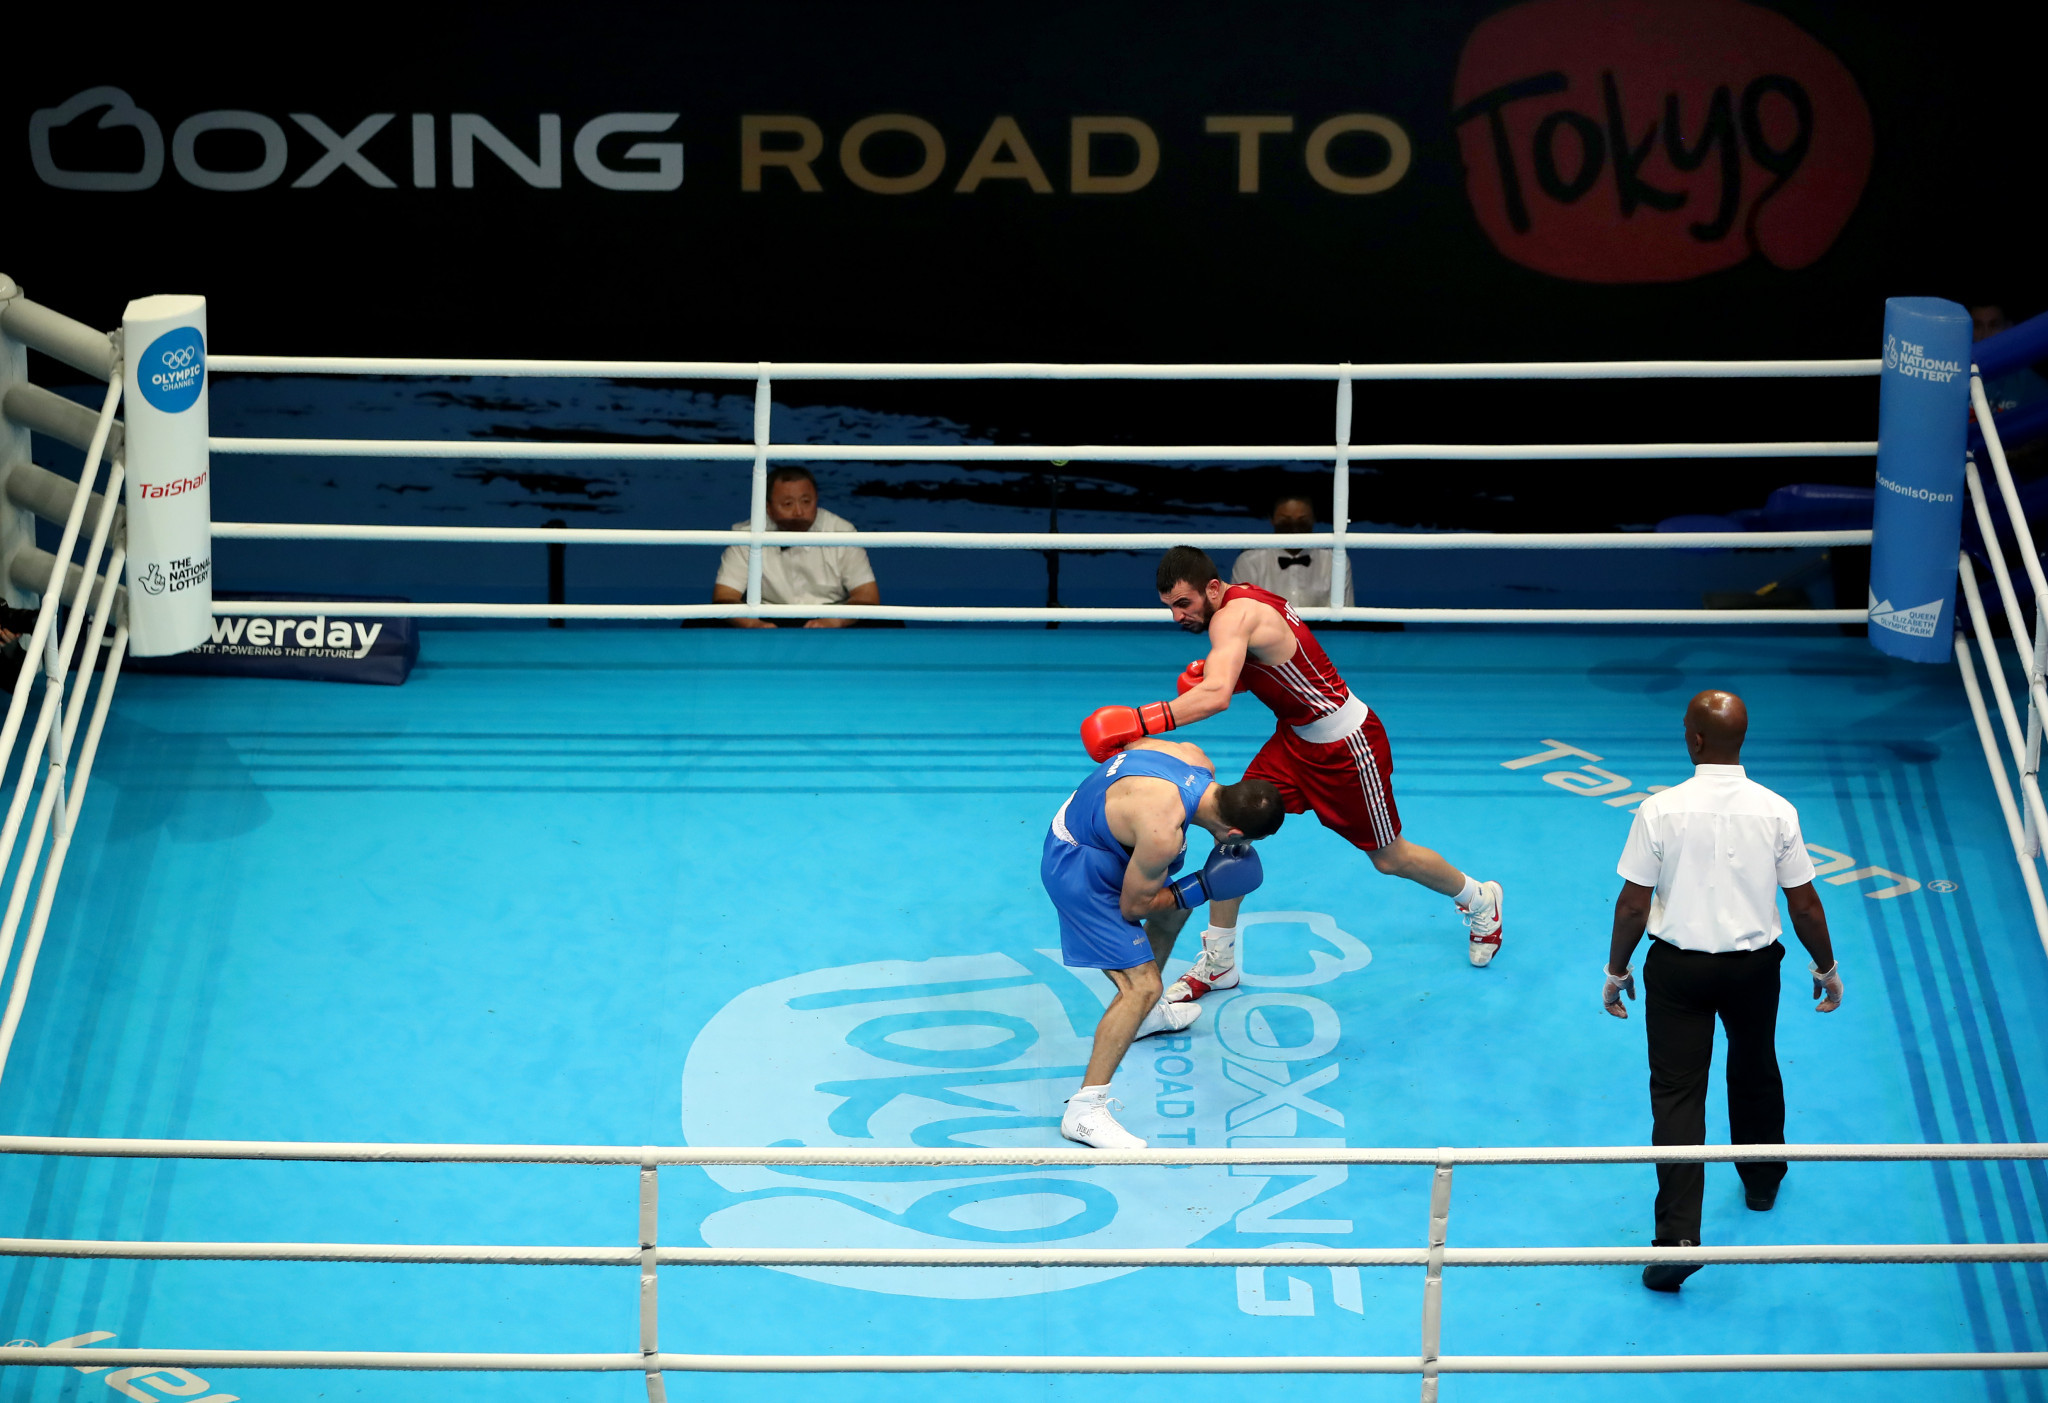 The European Olympic boxing qualifying tournament for Tokyo 2020 is expected to resume at the point where it was halted in April 2021 ©Getty Images